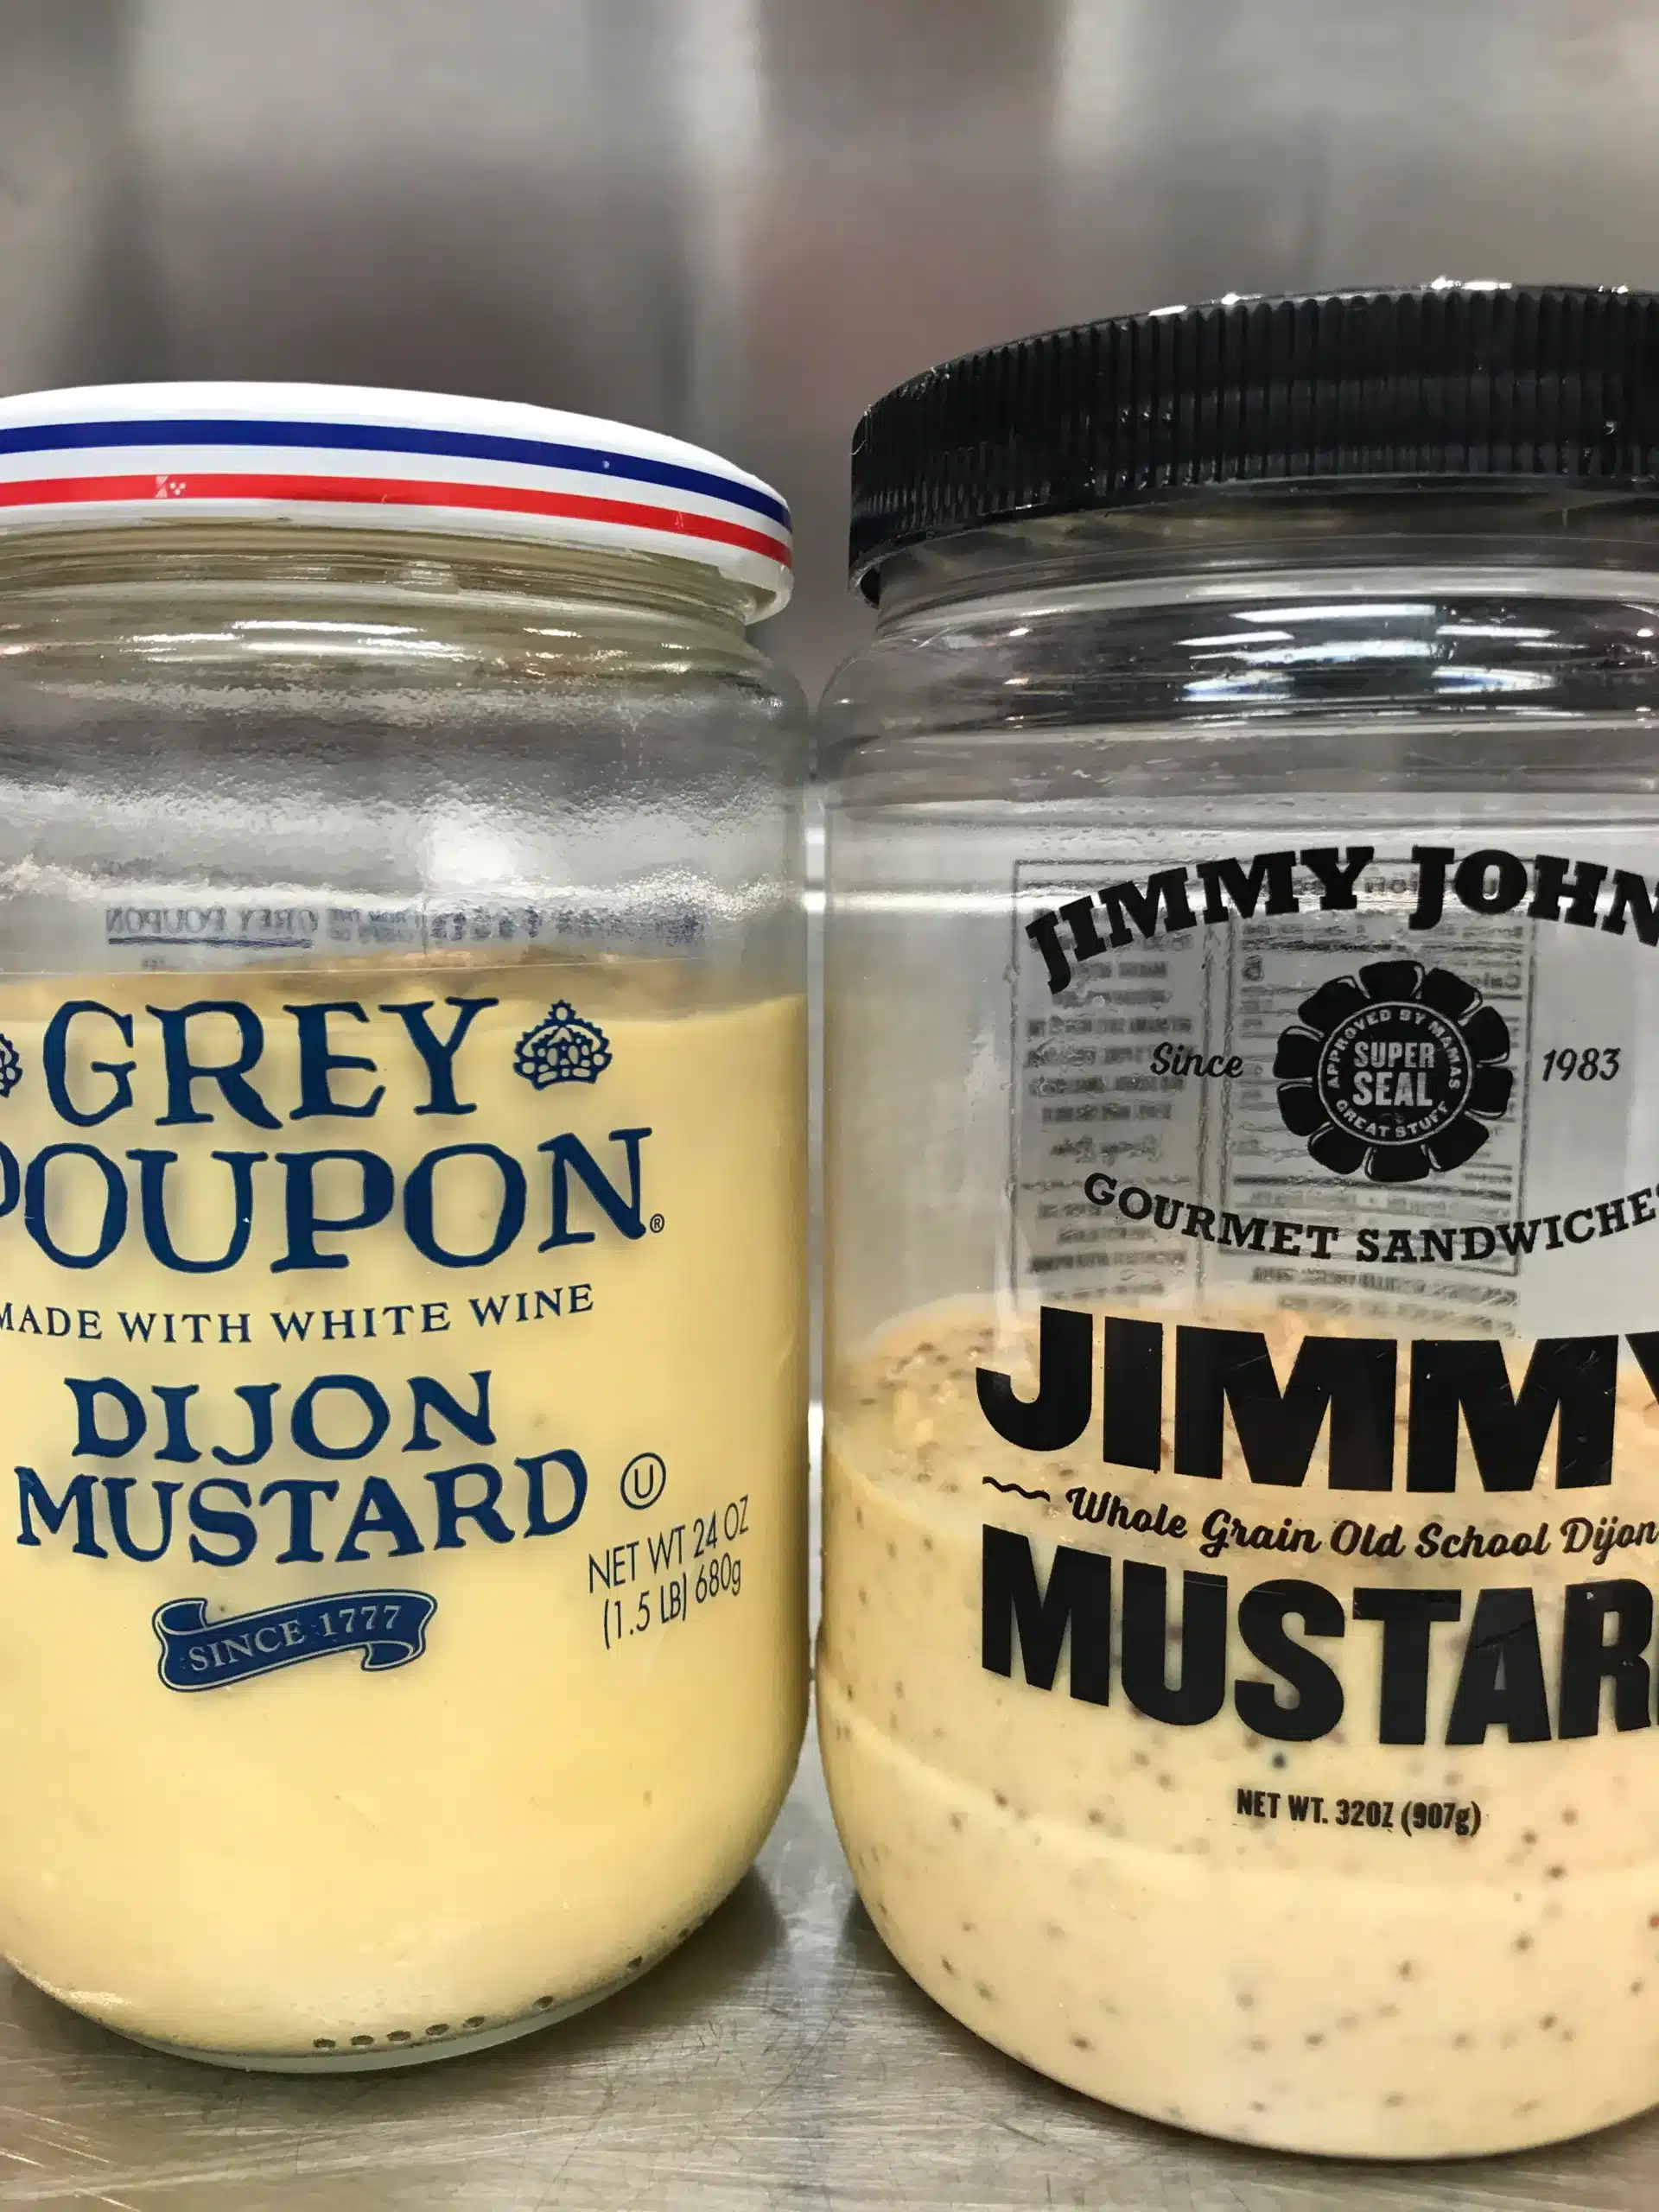 What Is Jimmy Mustard?